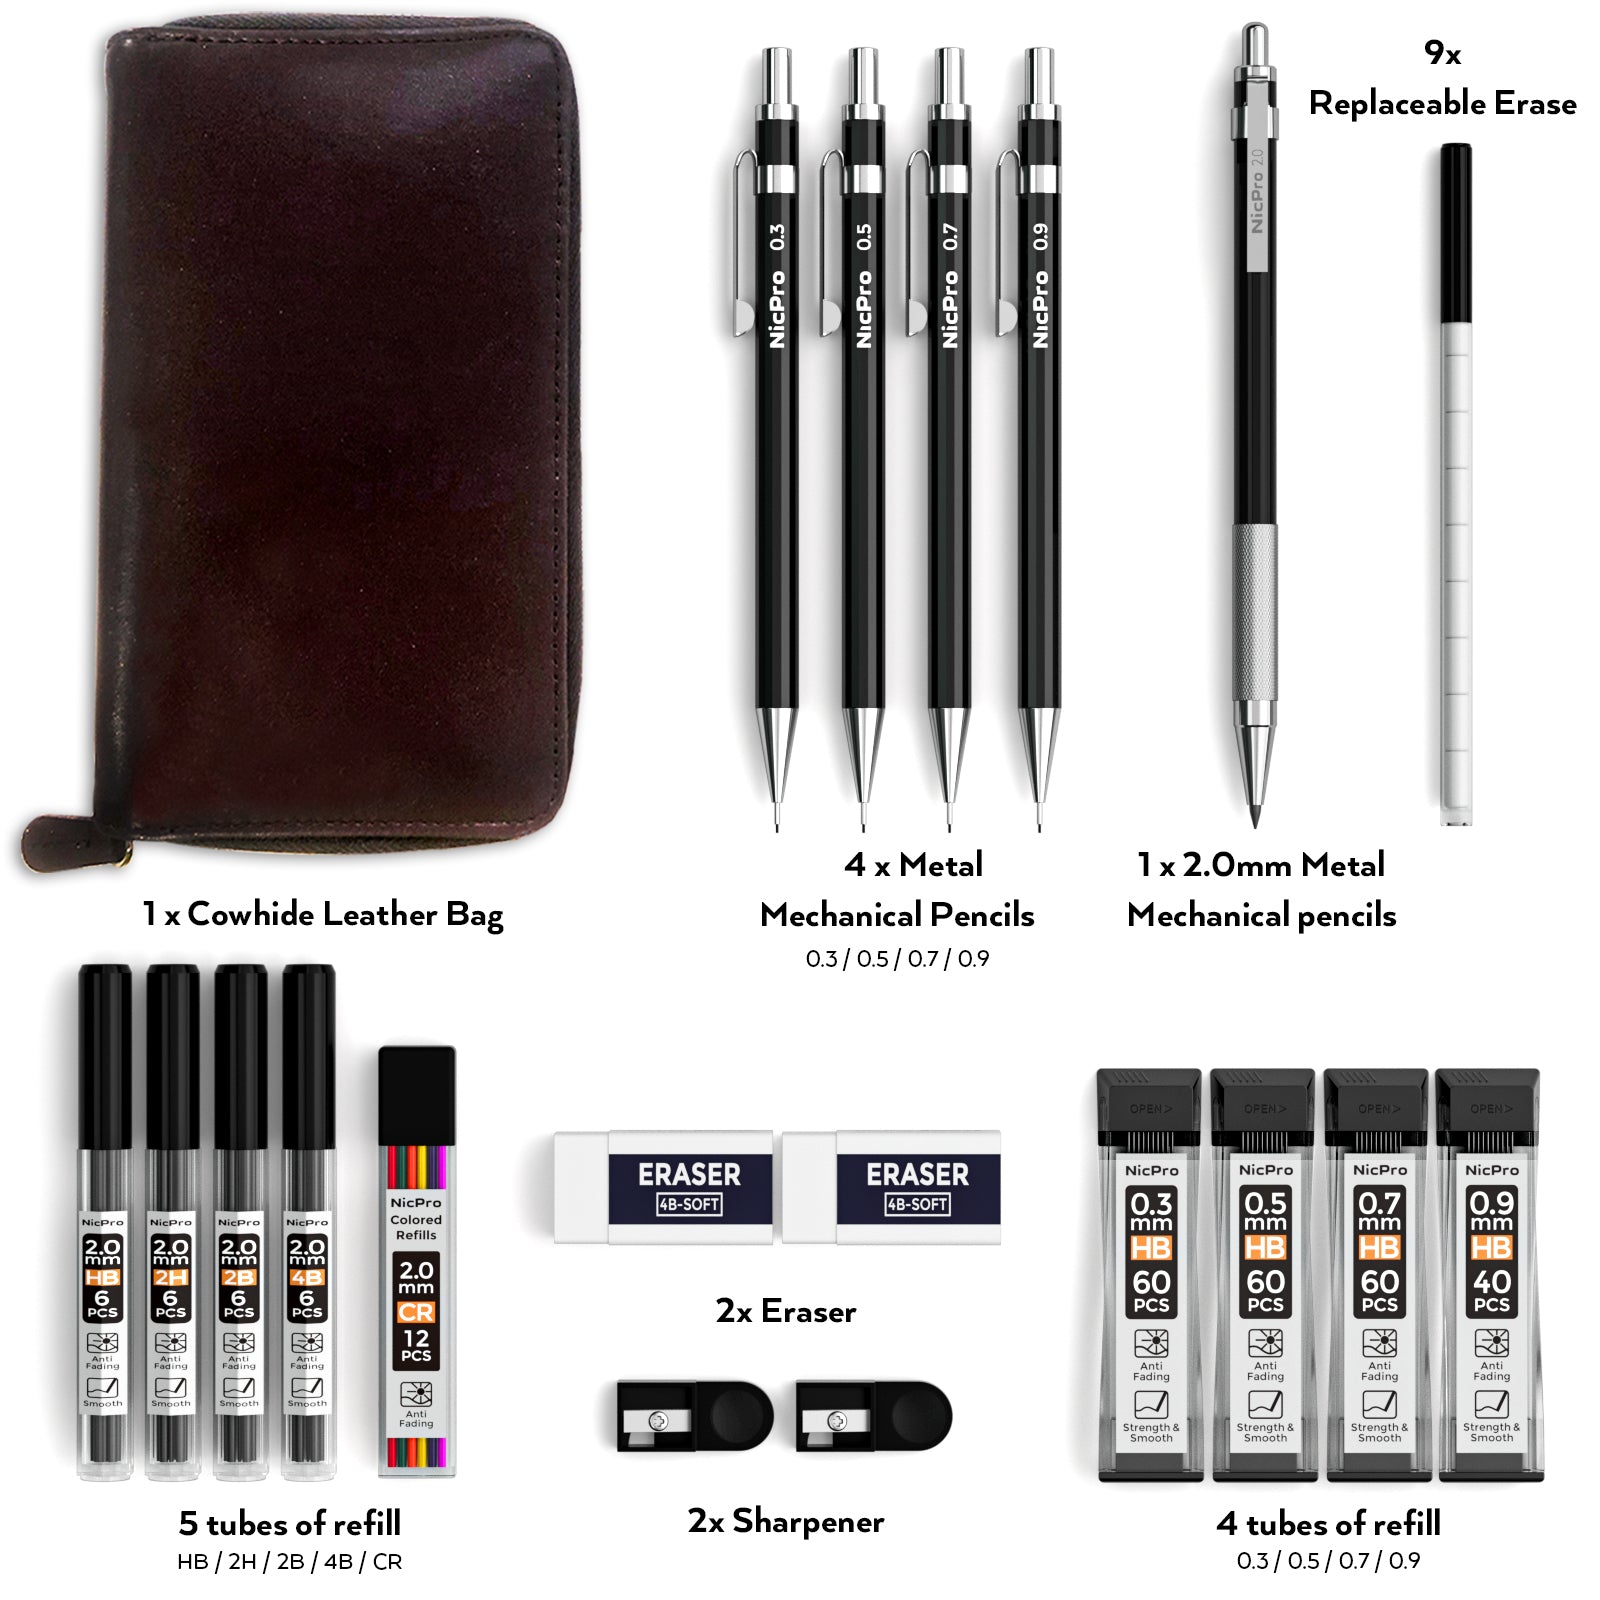 Nicpro 5 PCS Black Metal Mechanical Pencil Set in Leather Case, 0.3, 0.5, 0.7, 0.9 mm & 2mm Lead Pencil Holders, (4B 2B HB 2H) Lead Refills (Black & Colors), Erasers For Art Drafting Sketching Drawing